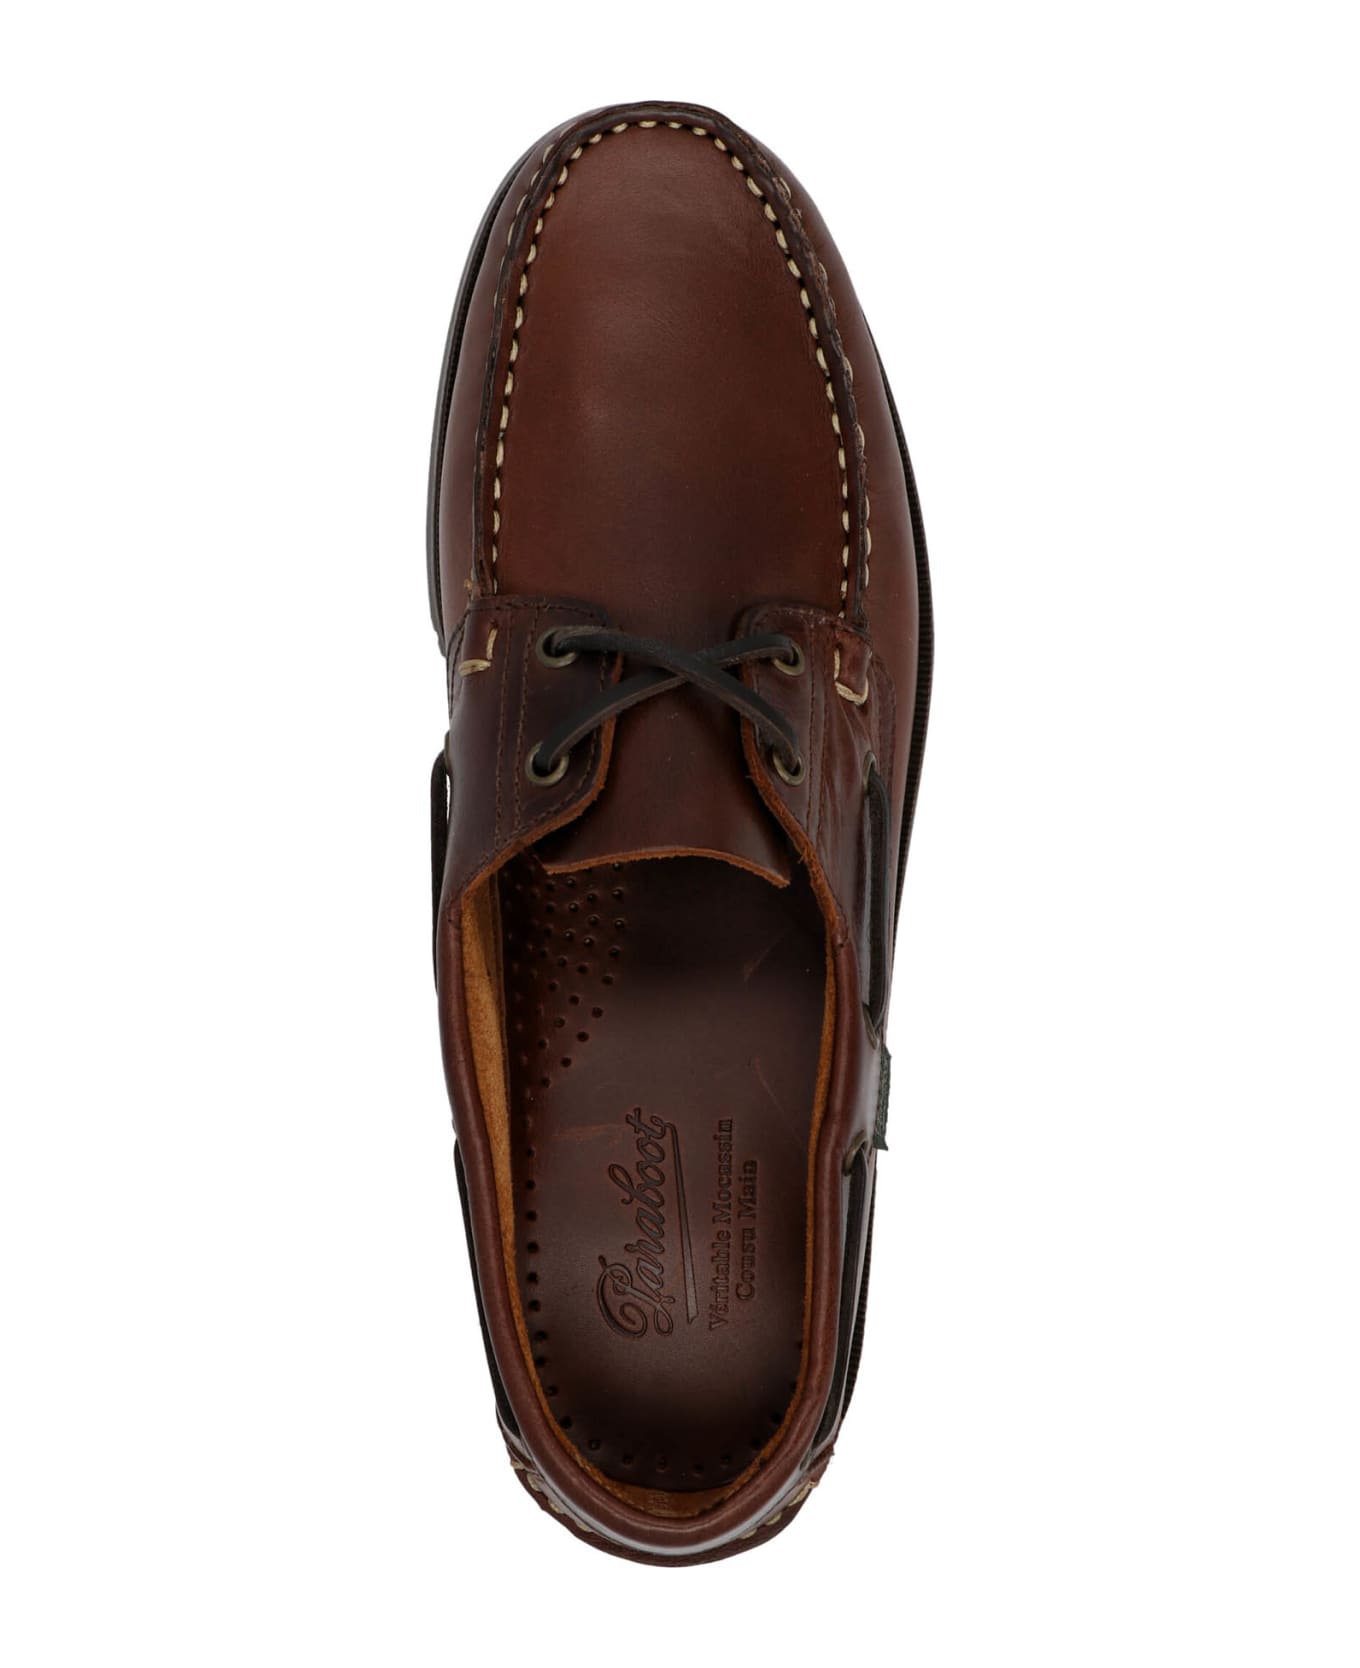 Paraboot 'barth' Boat Shoes - Brown ローファー＆デッキシューズ